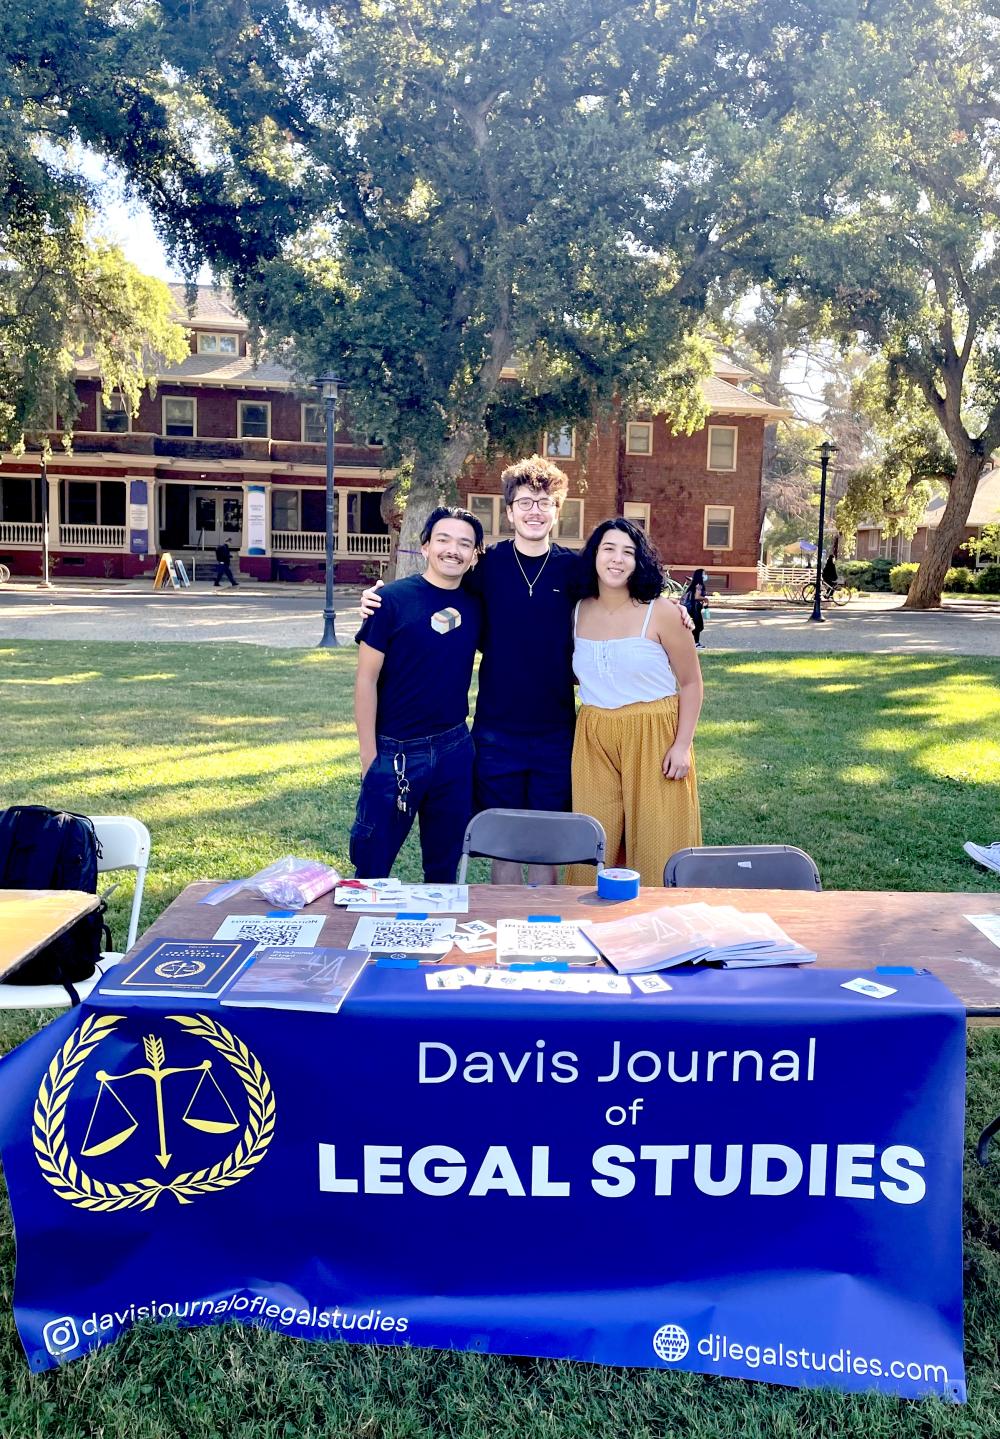 Three students stand side by side in front of a table with a blue sign that reads "Davis Journal of Legal Studies"